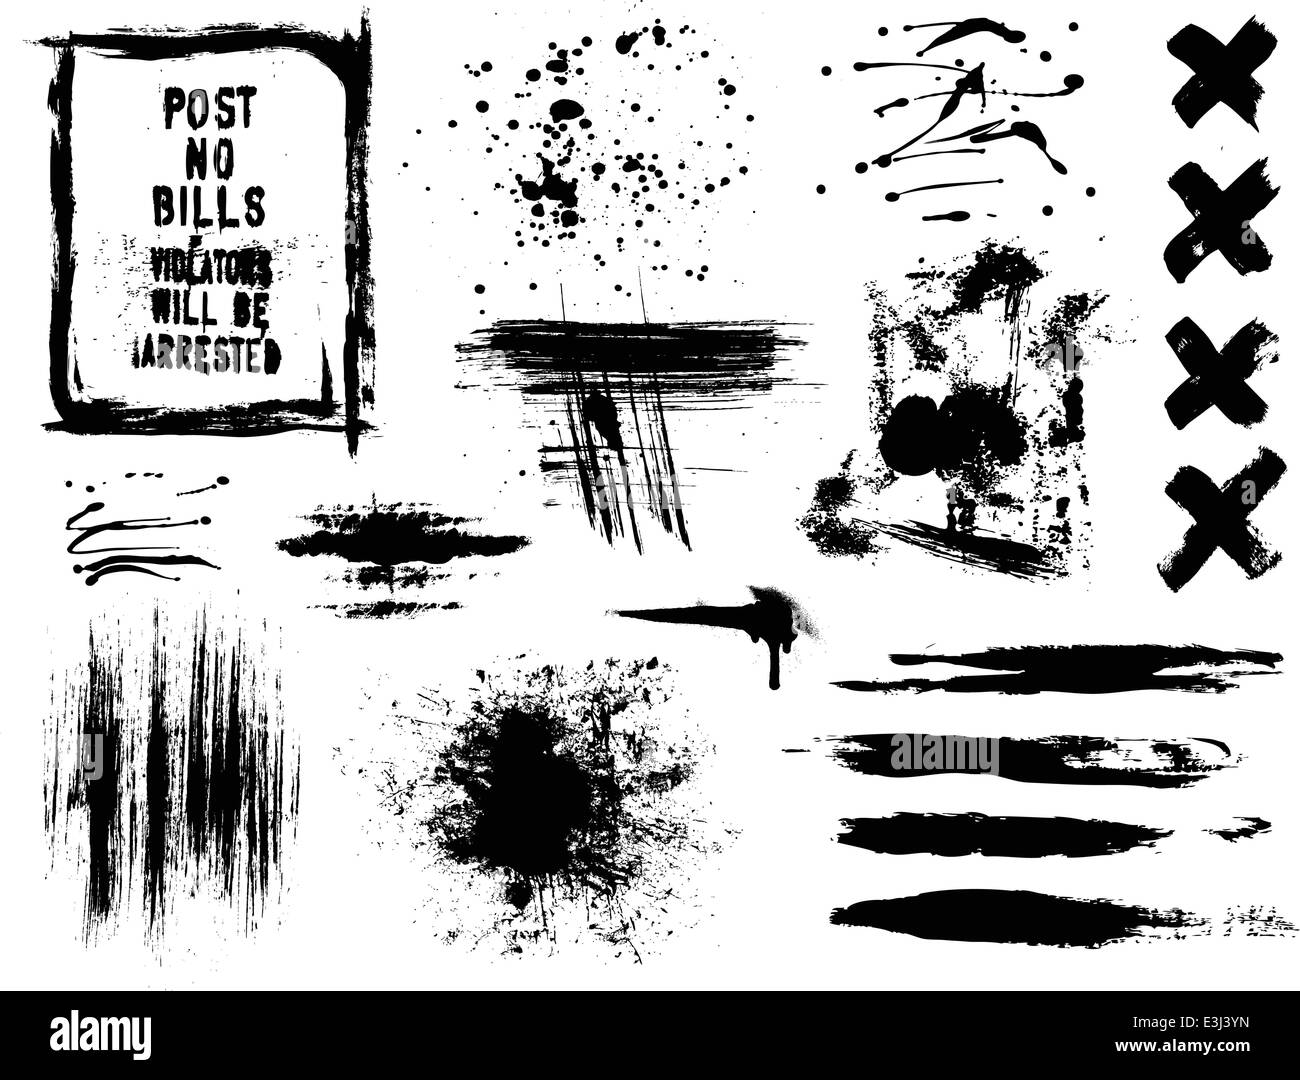 Grunge elements with spray paint splatter and scratches Stock Vector